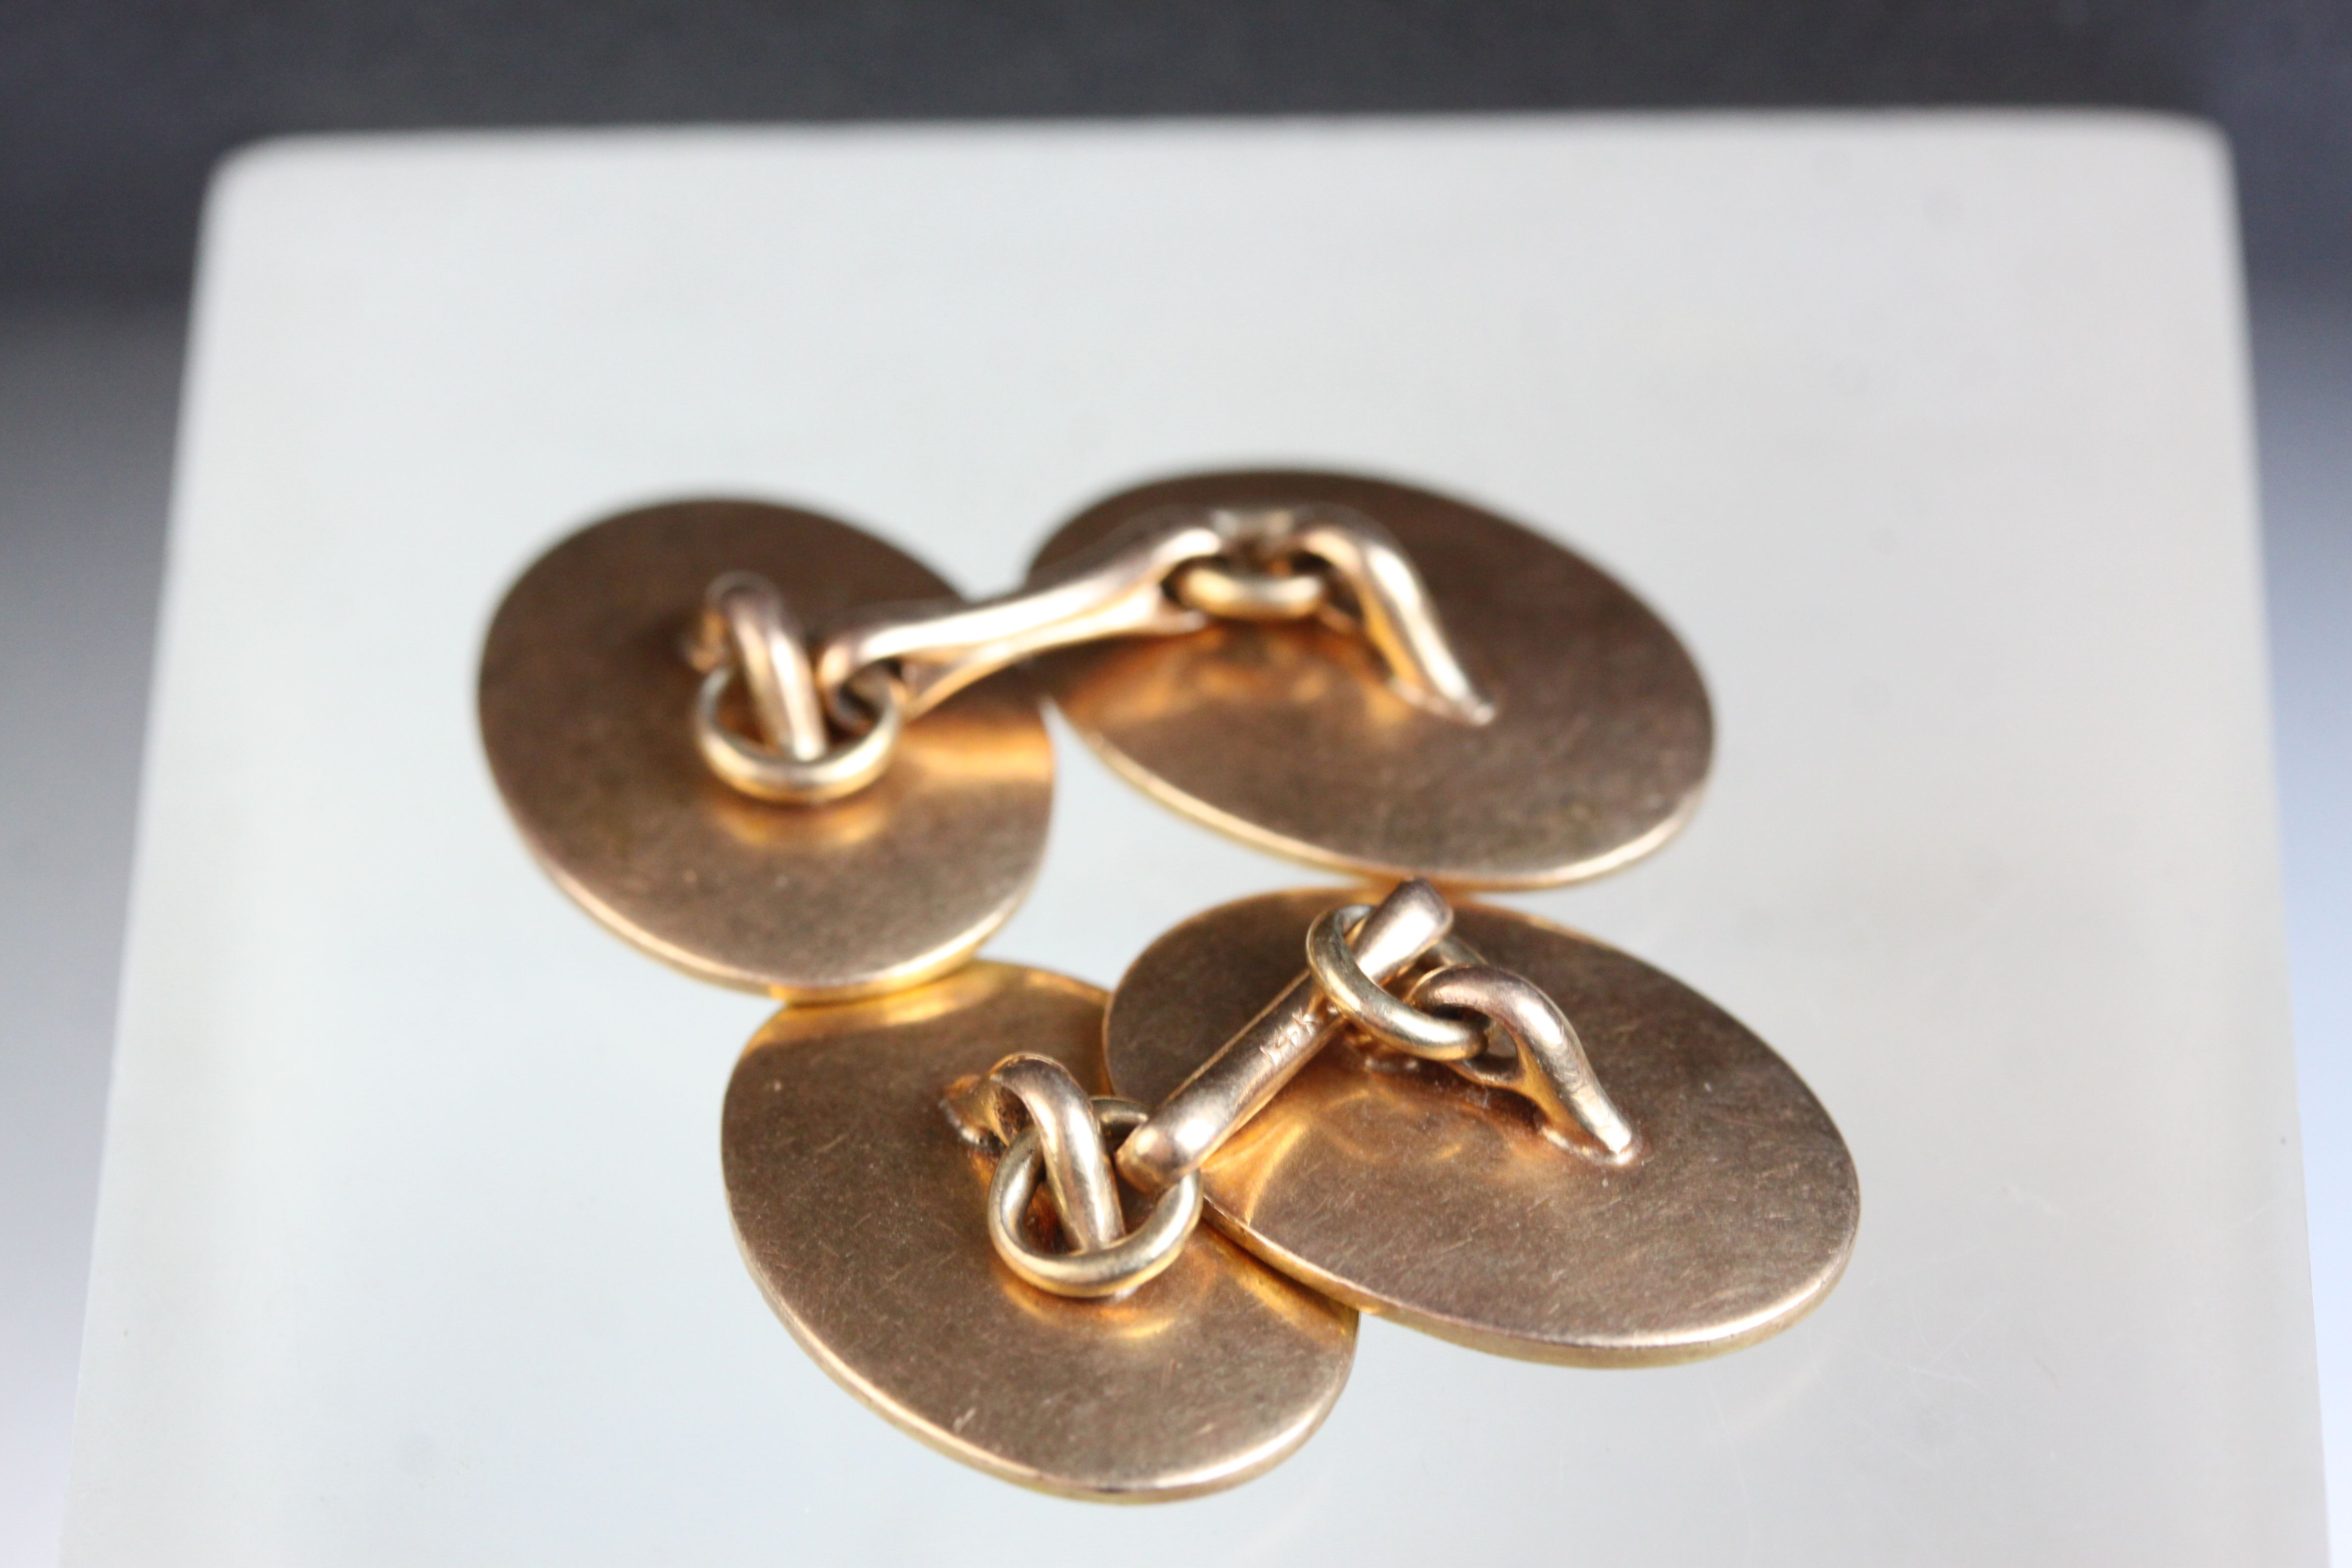 Pair of 14k rose gold chain link cufflinks, the oval panels each depicting a horse's head in relief, - Image 3 of 3